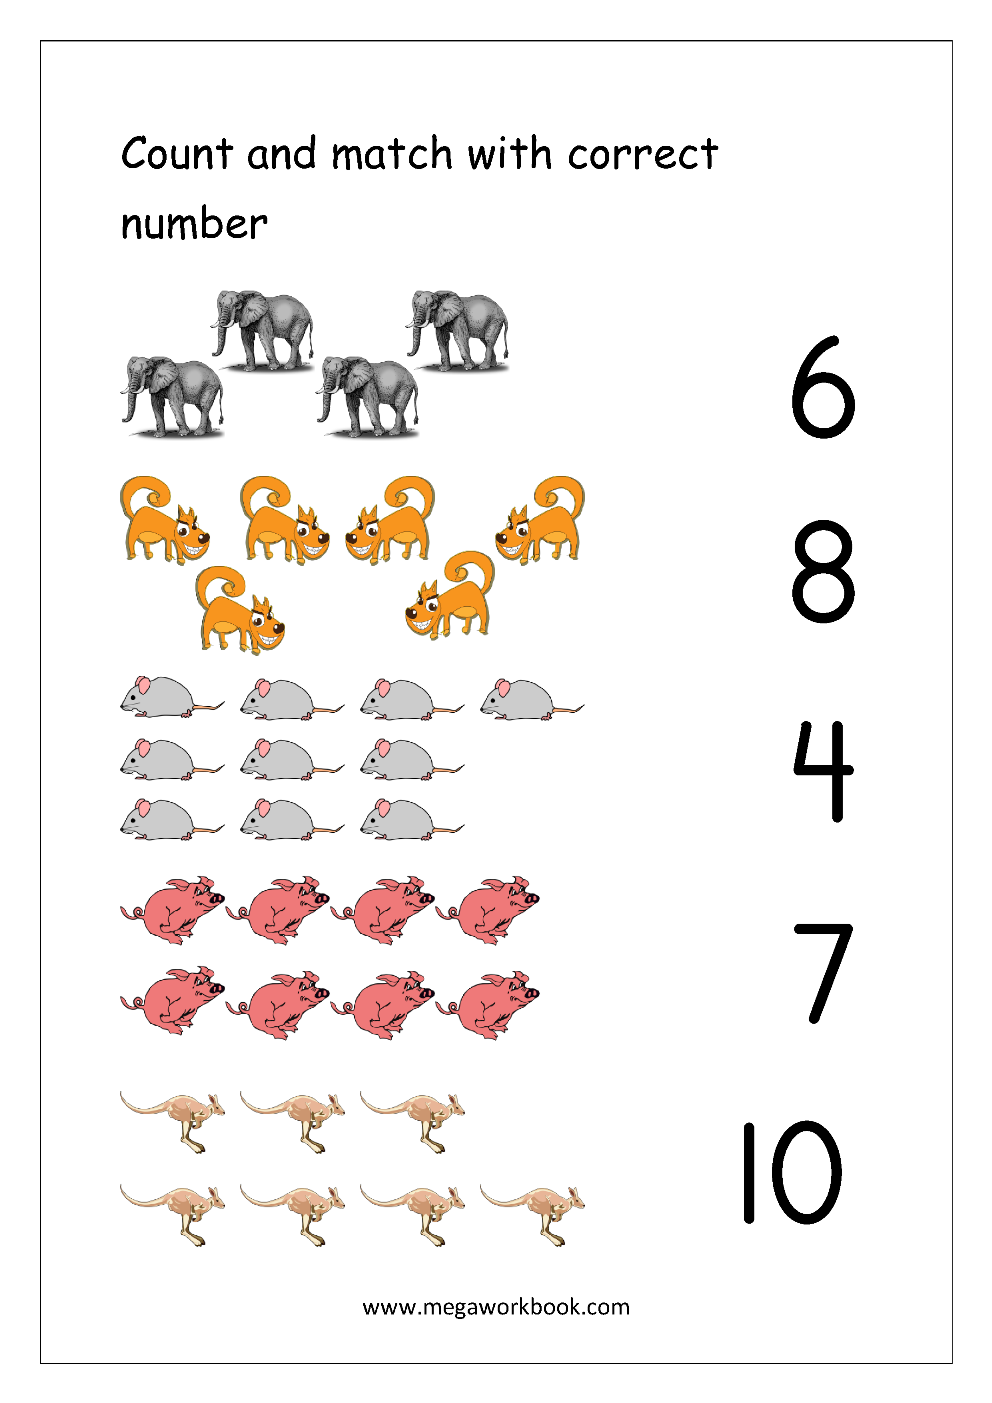 Free Printable Number Matching Worksheets For Kindergarten And Preschool Count And Match 1 10 